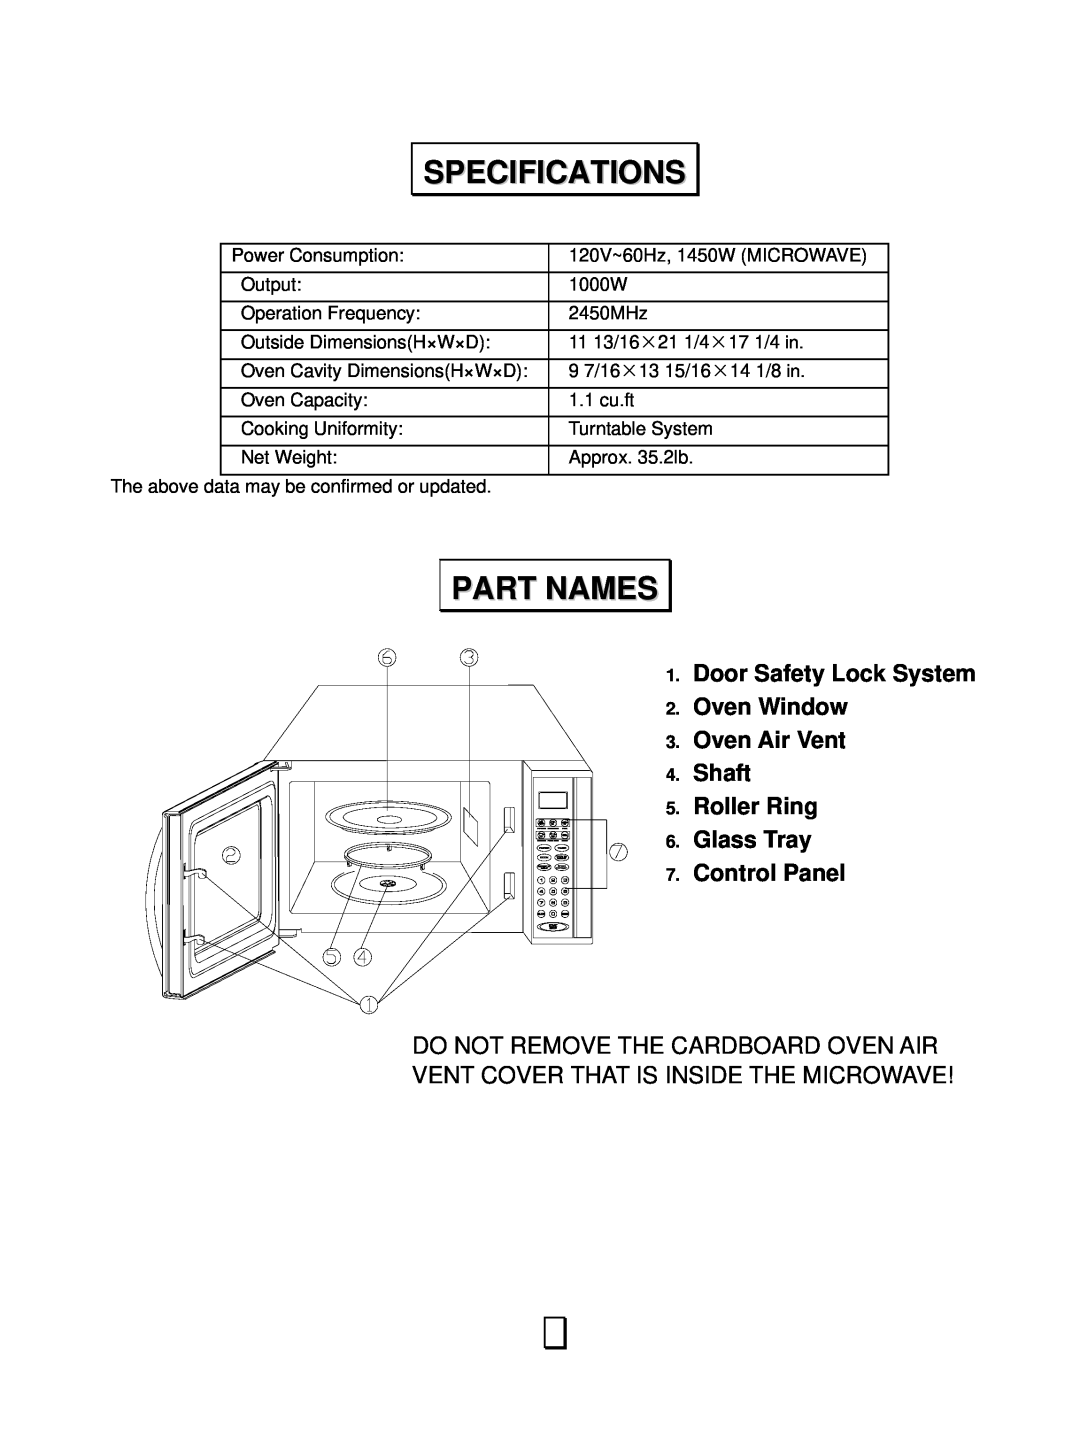 RCA RMW1138 owner manual Specifications, Part Names, Door Safety Lock System Oven Window Oven Air Vent Shaft Roller Ring 